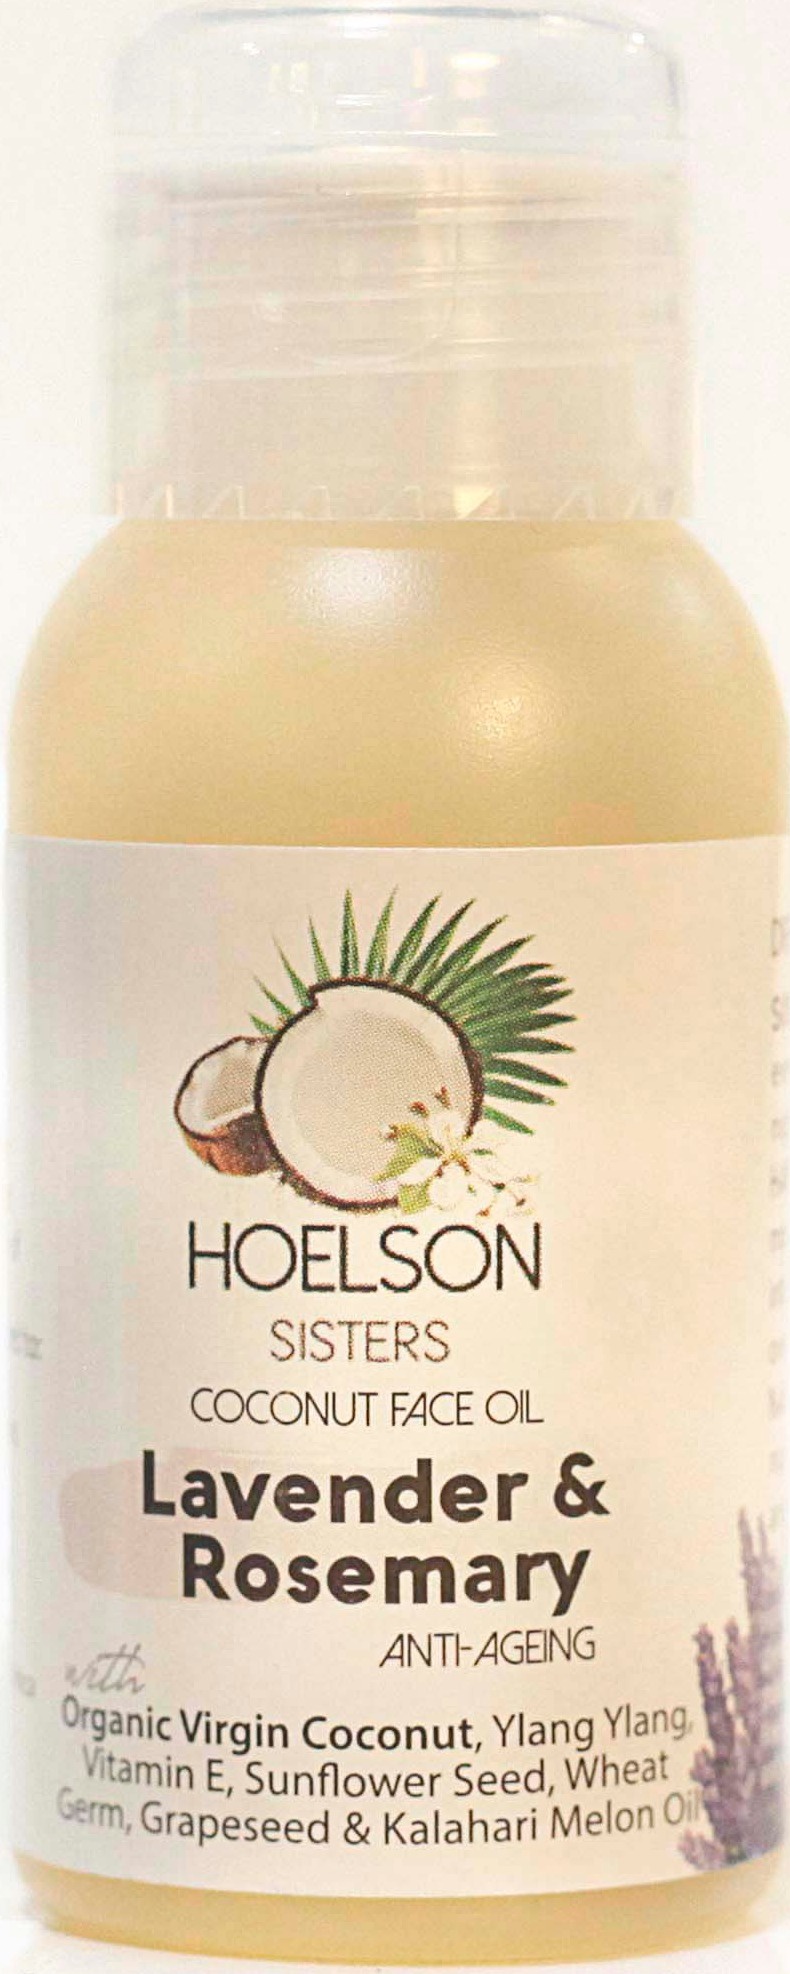 Hoelson Sisters Coconut Face Oil With Lavender & Rosemary